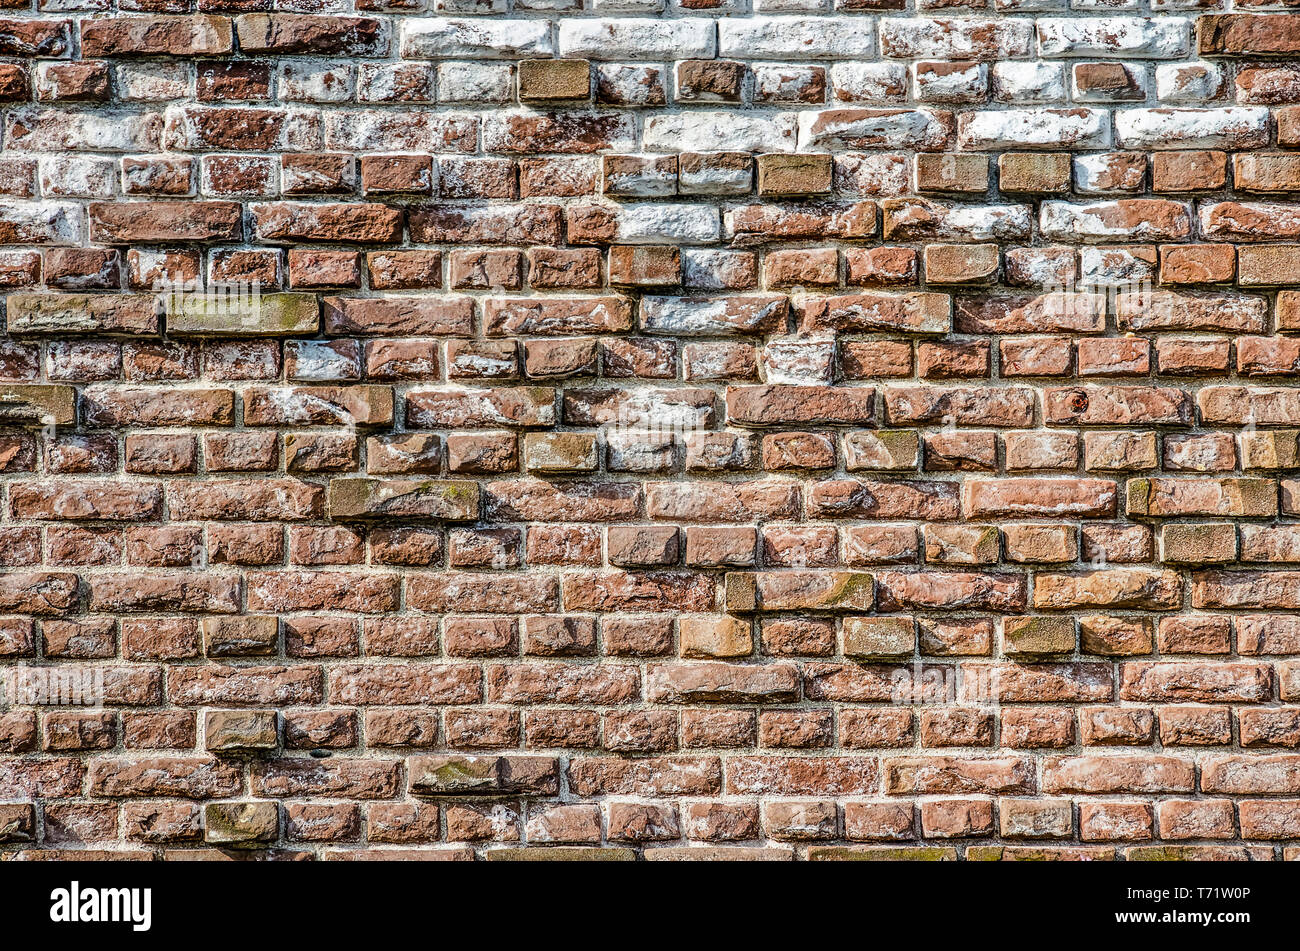 Old masonry wall with chalk and other impurities and with protruding bricks forming an irregular relief pattern Stock Photo